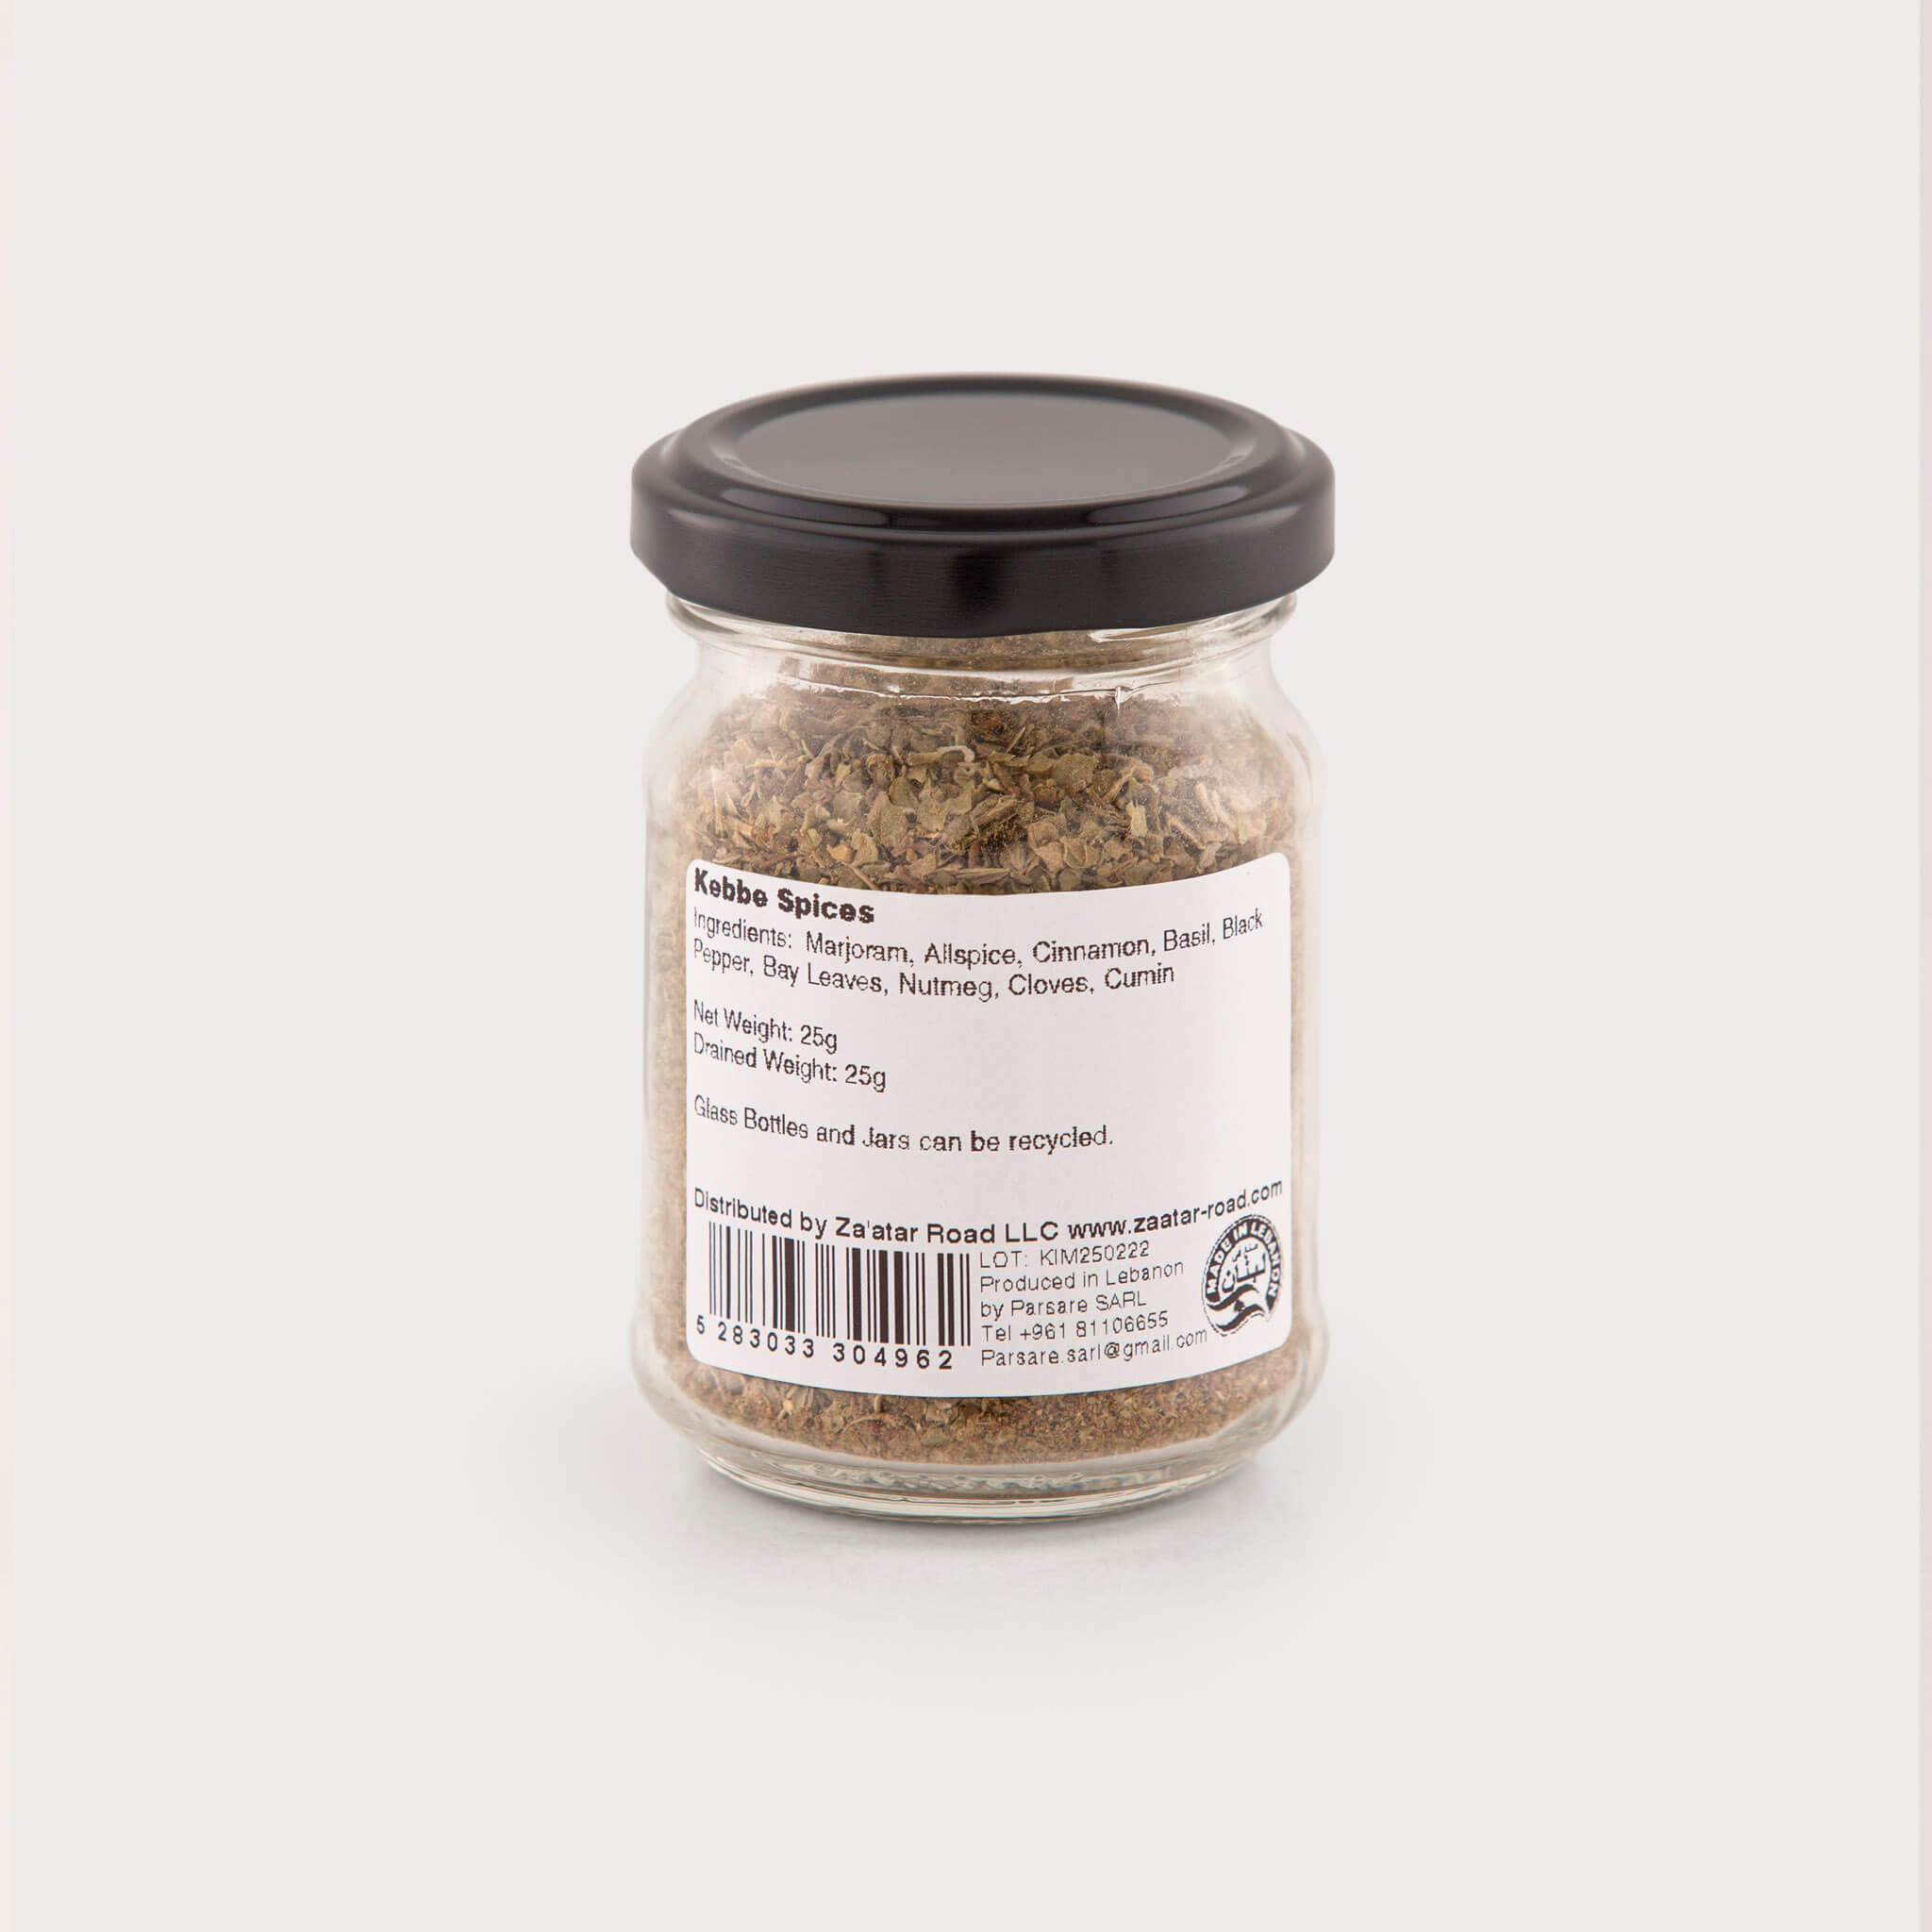 Kebbe Spices